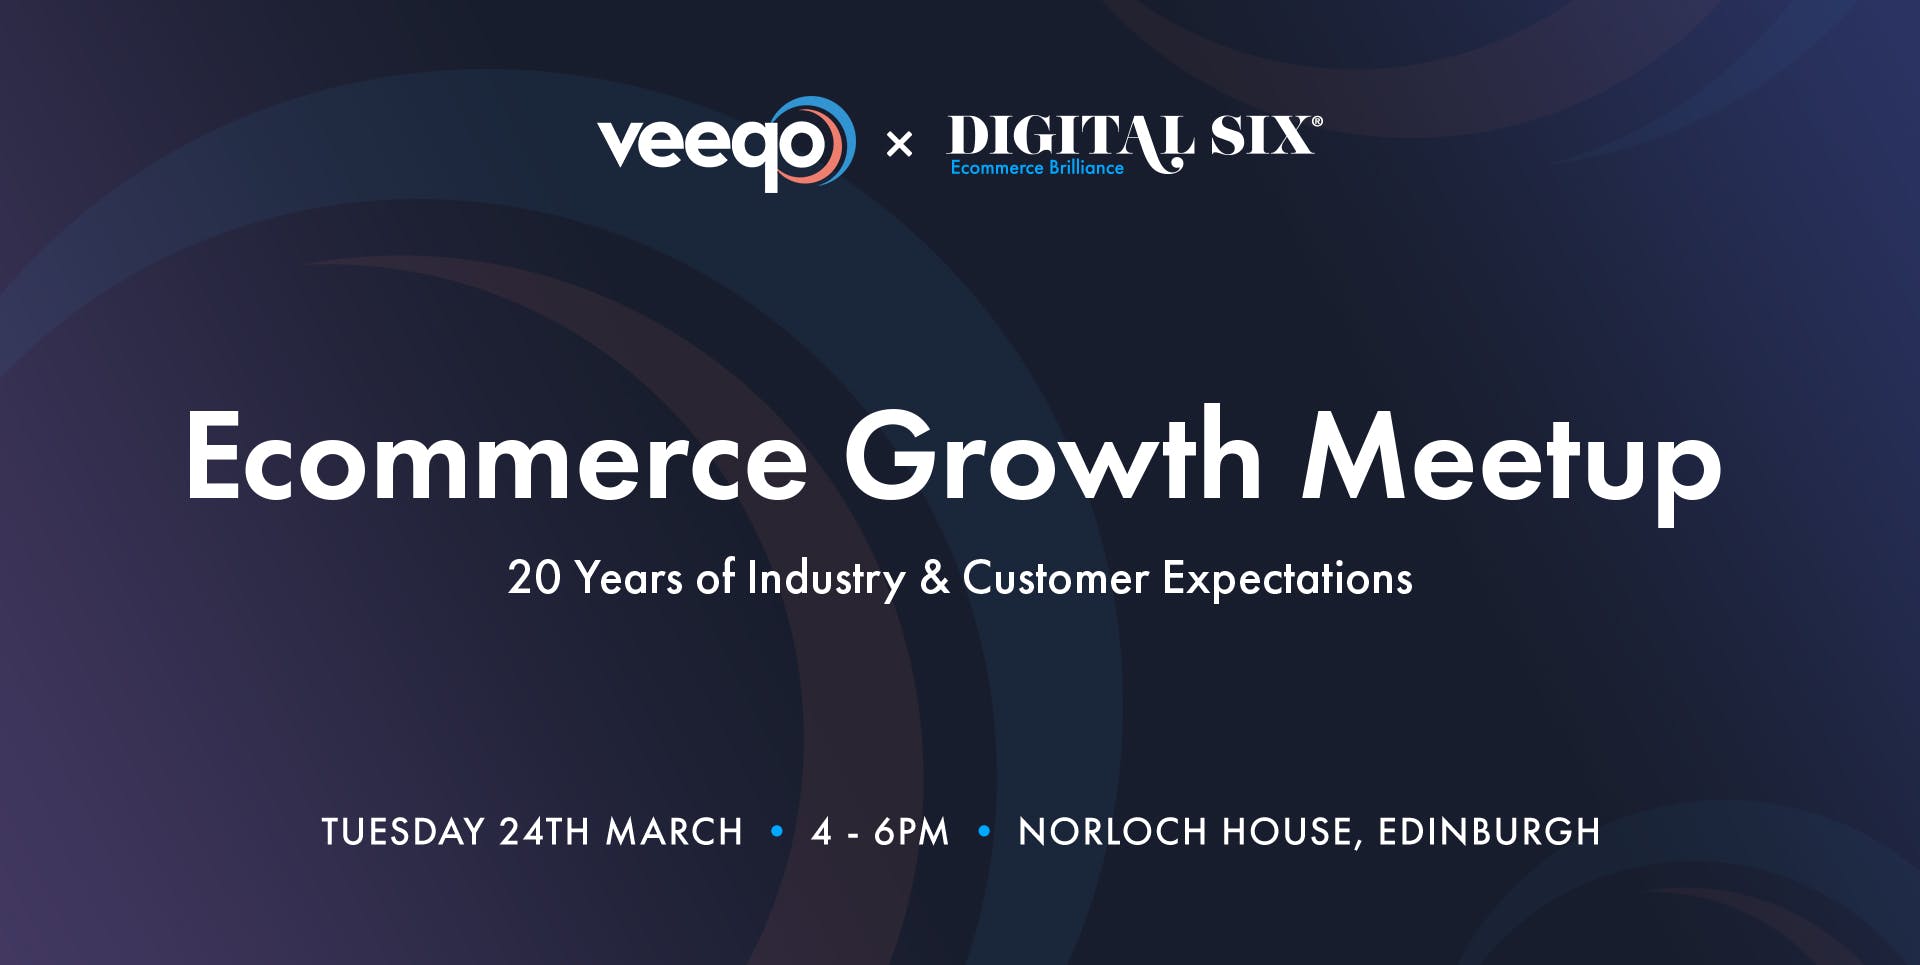 Ecommerce Growth Meet-up with Veeqo